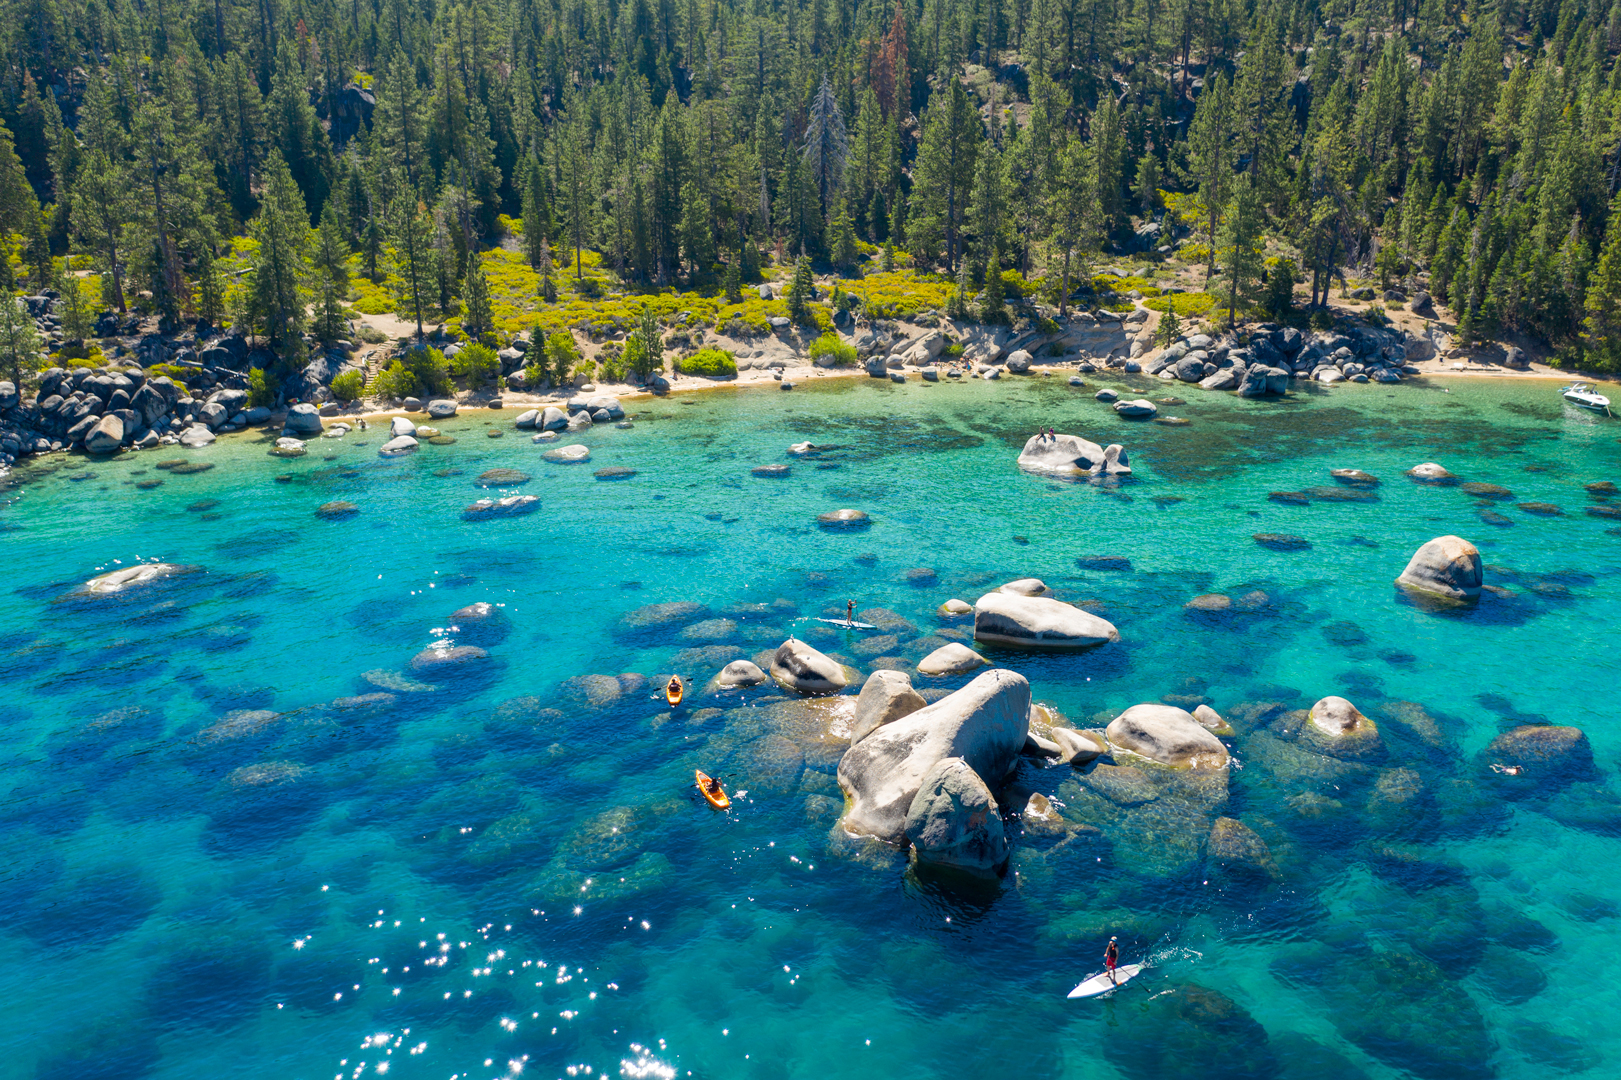 Whale beach on Lake Tahoe on a sunny summer day with kayakers and paddlers